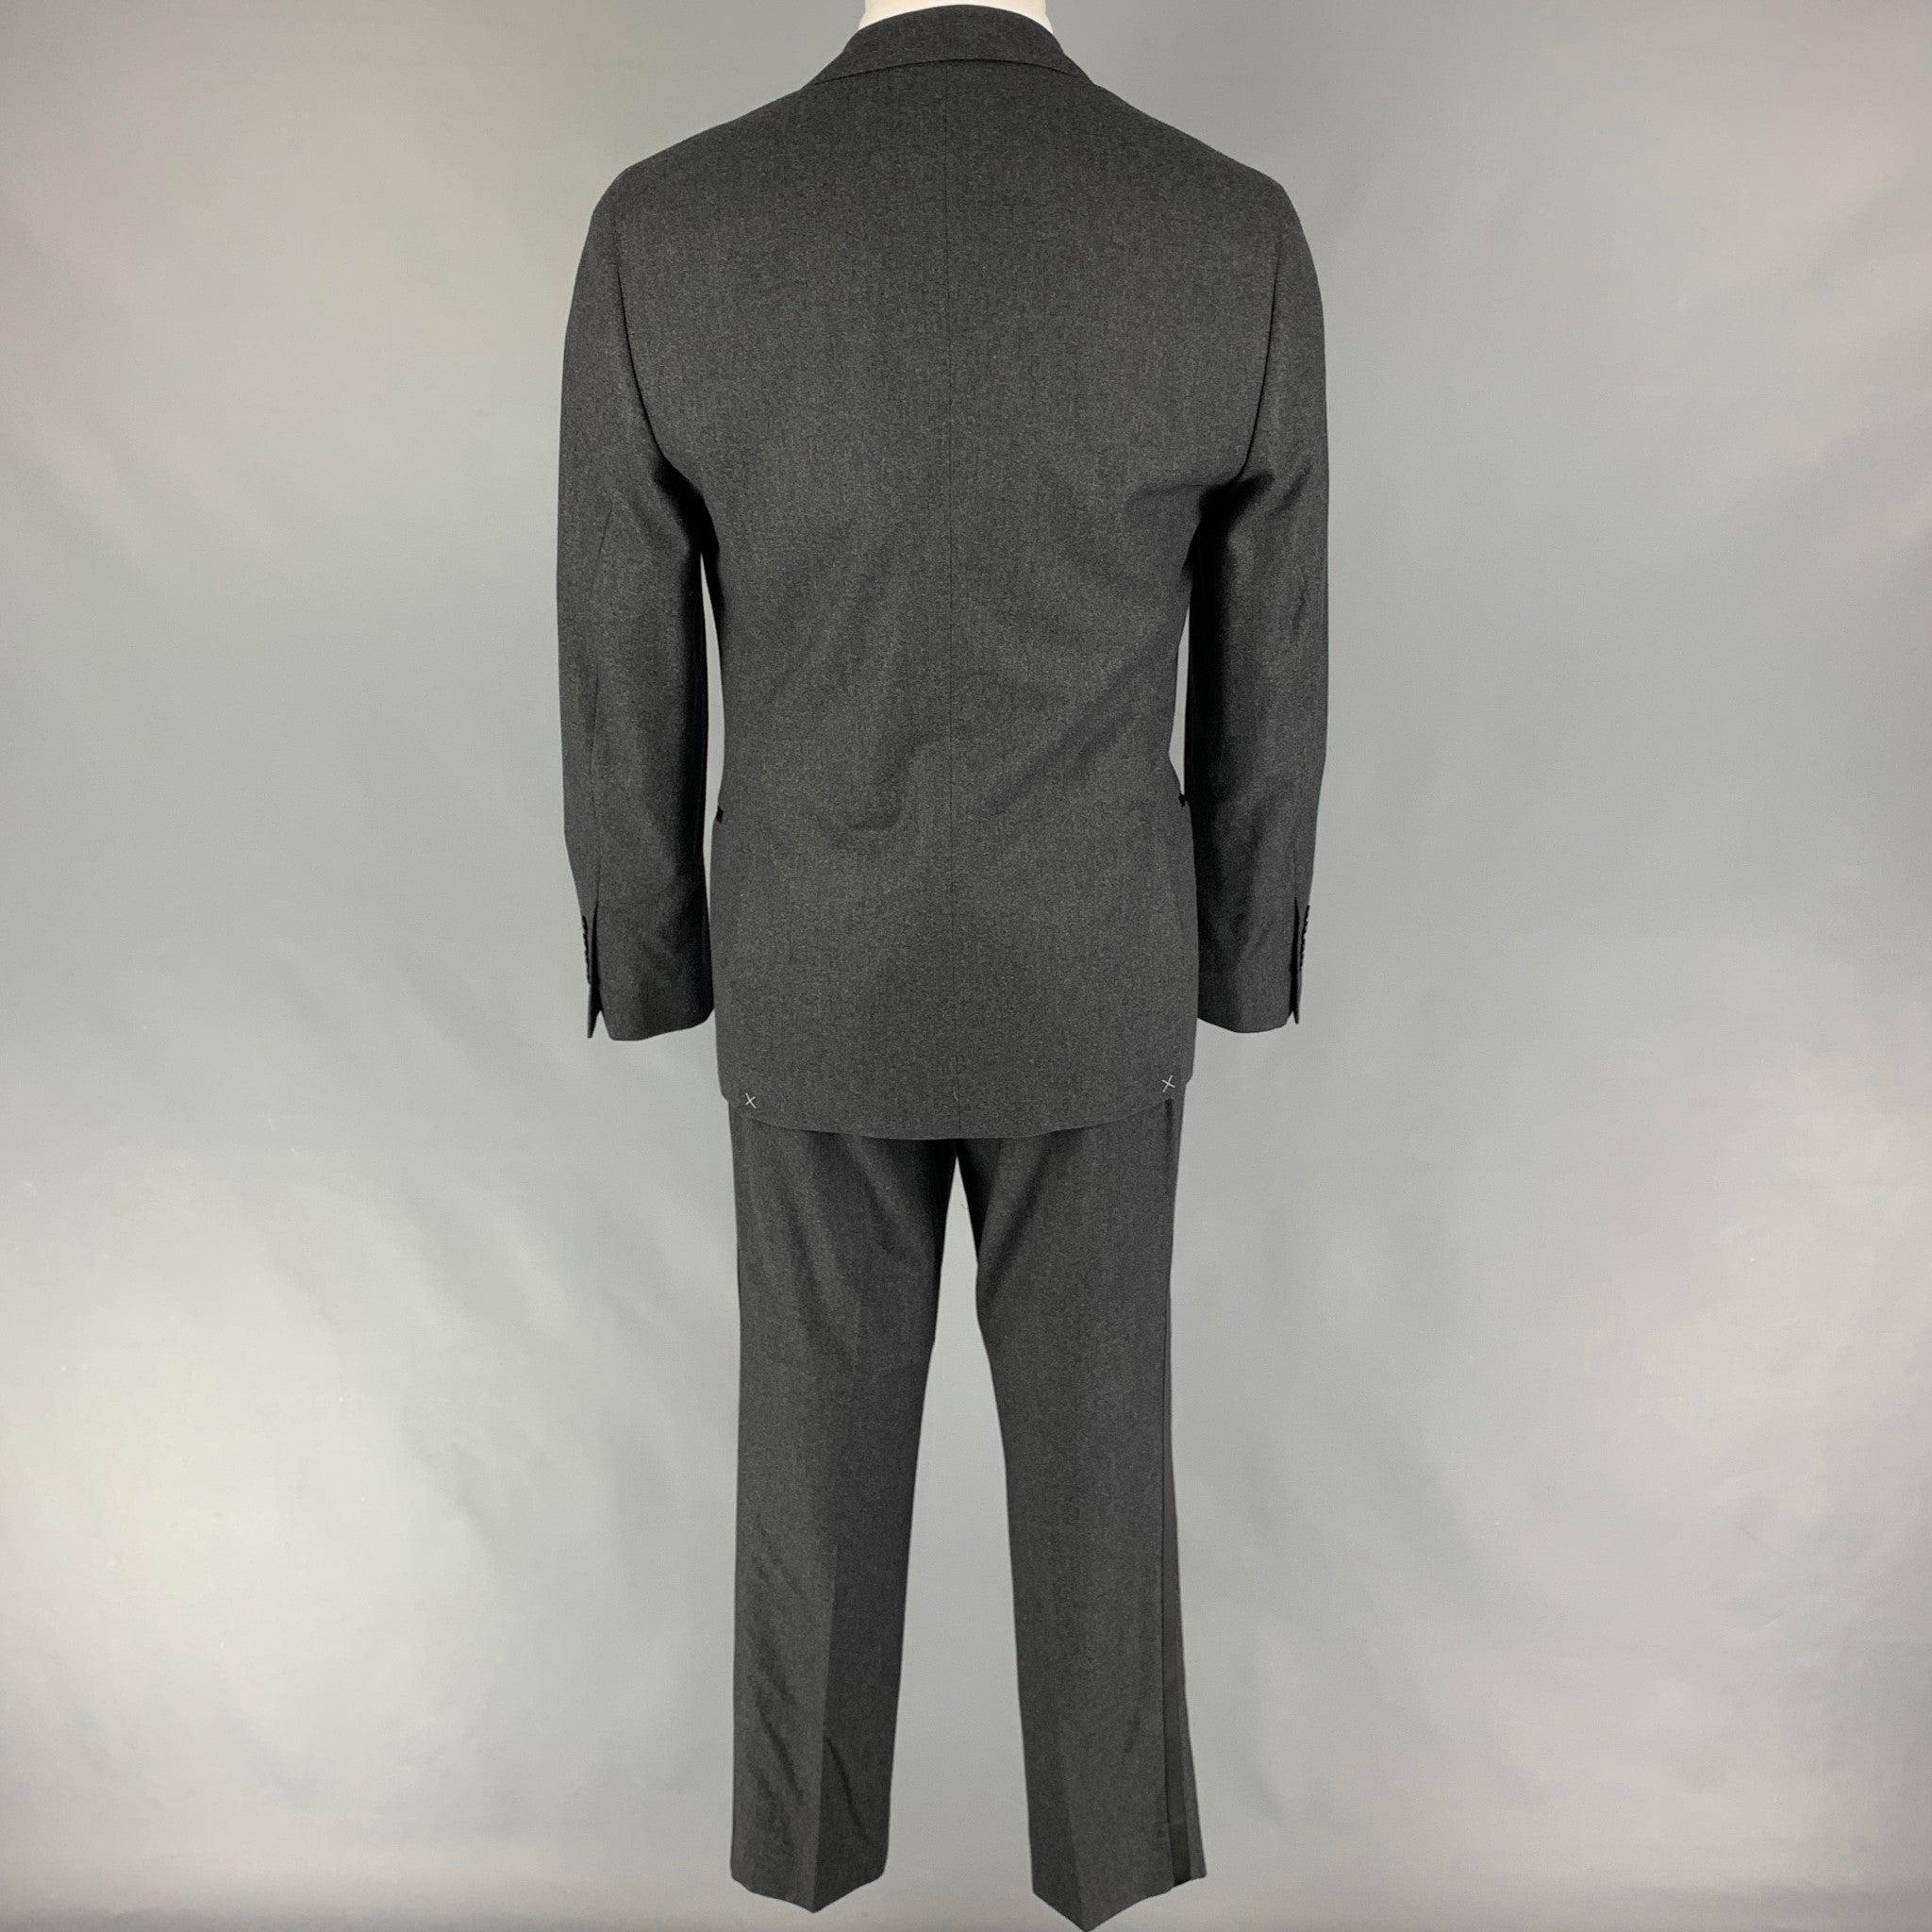 BRUNELLO CUCINELLI Size 38 Gray Black Wool Blend Tuxedo Suit In Good Condition For Sale In San Francisco, CA